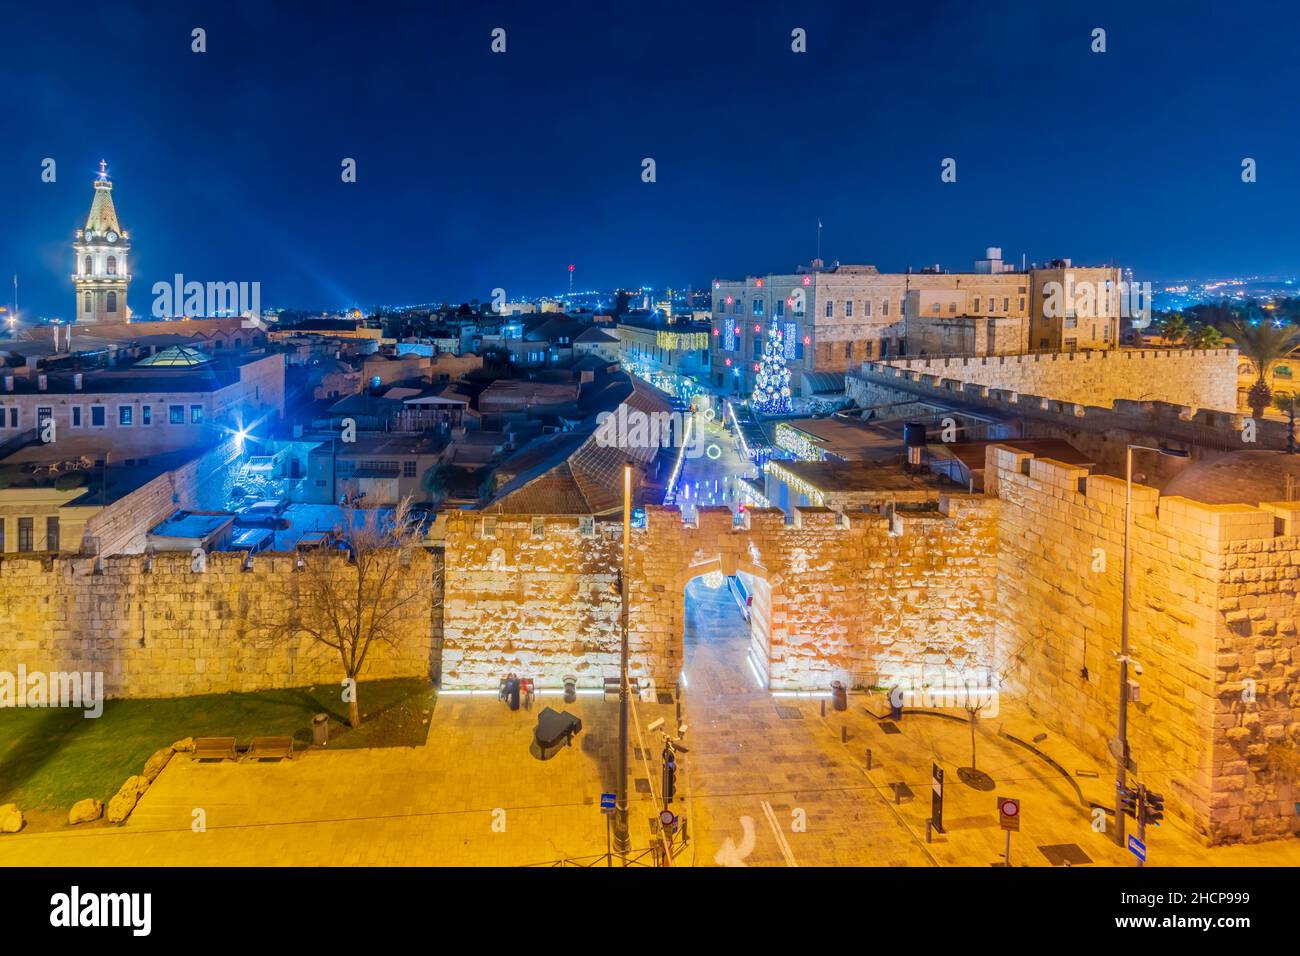 View of the new gate in the old city walls, with Christmas tree and Christmas lights. Jerusalem, Israel Stock Photo